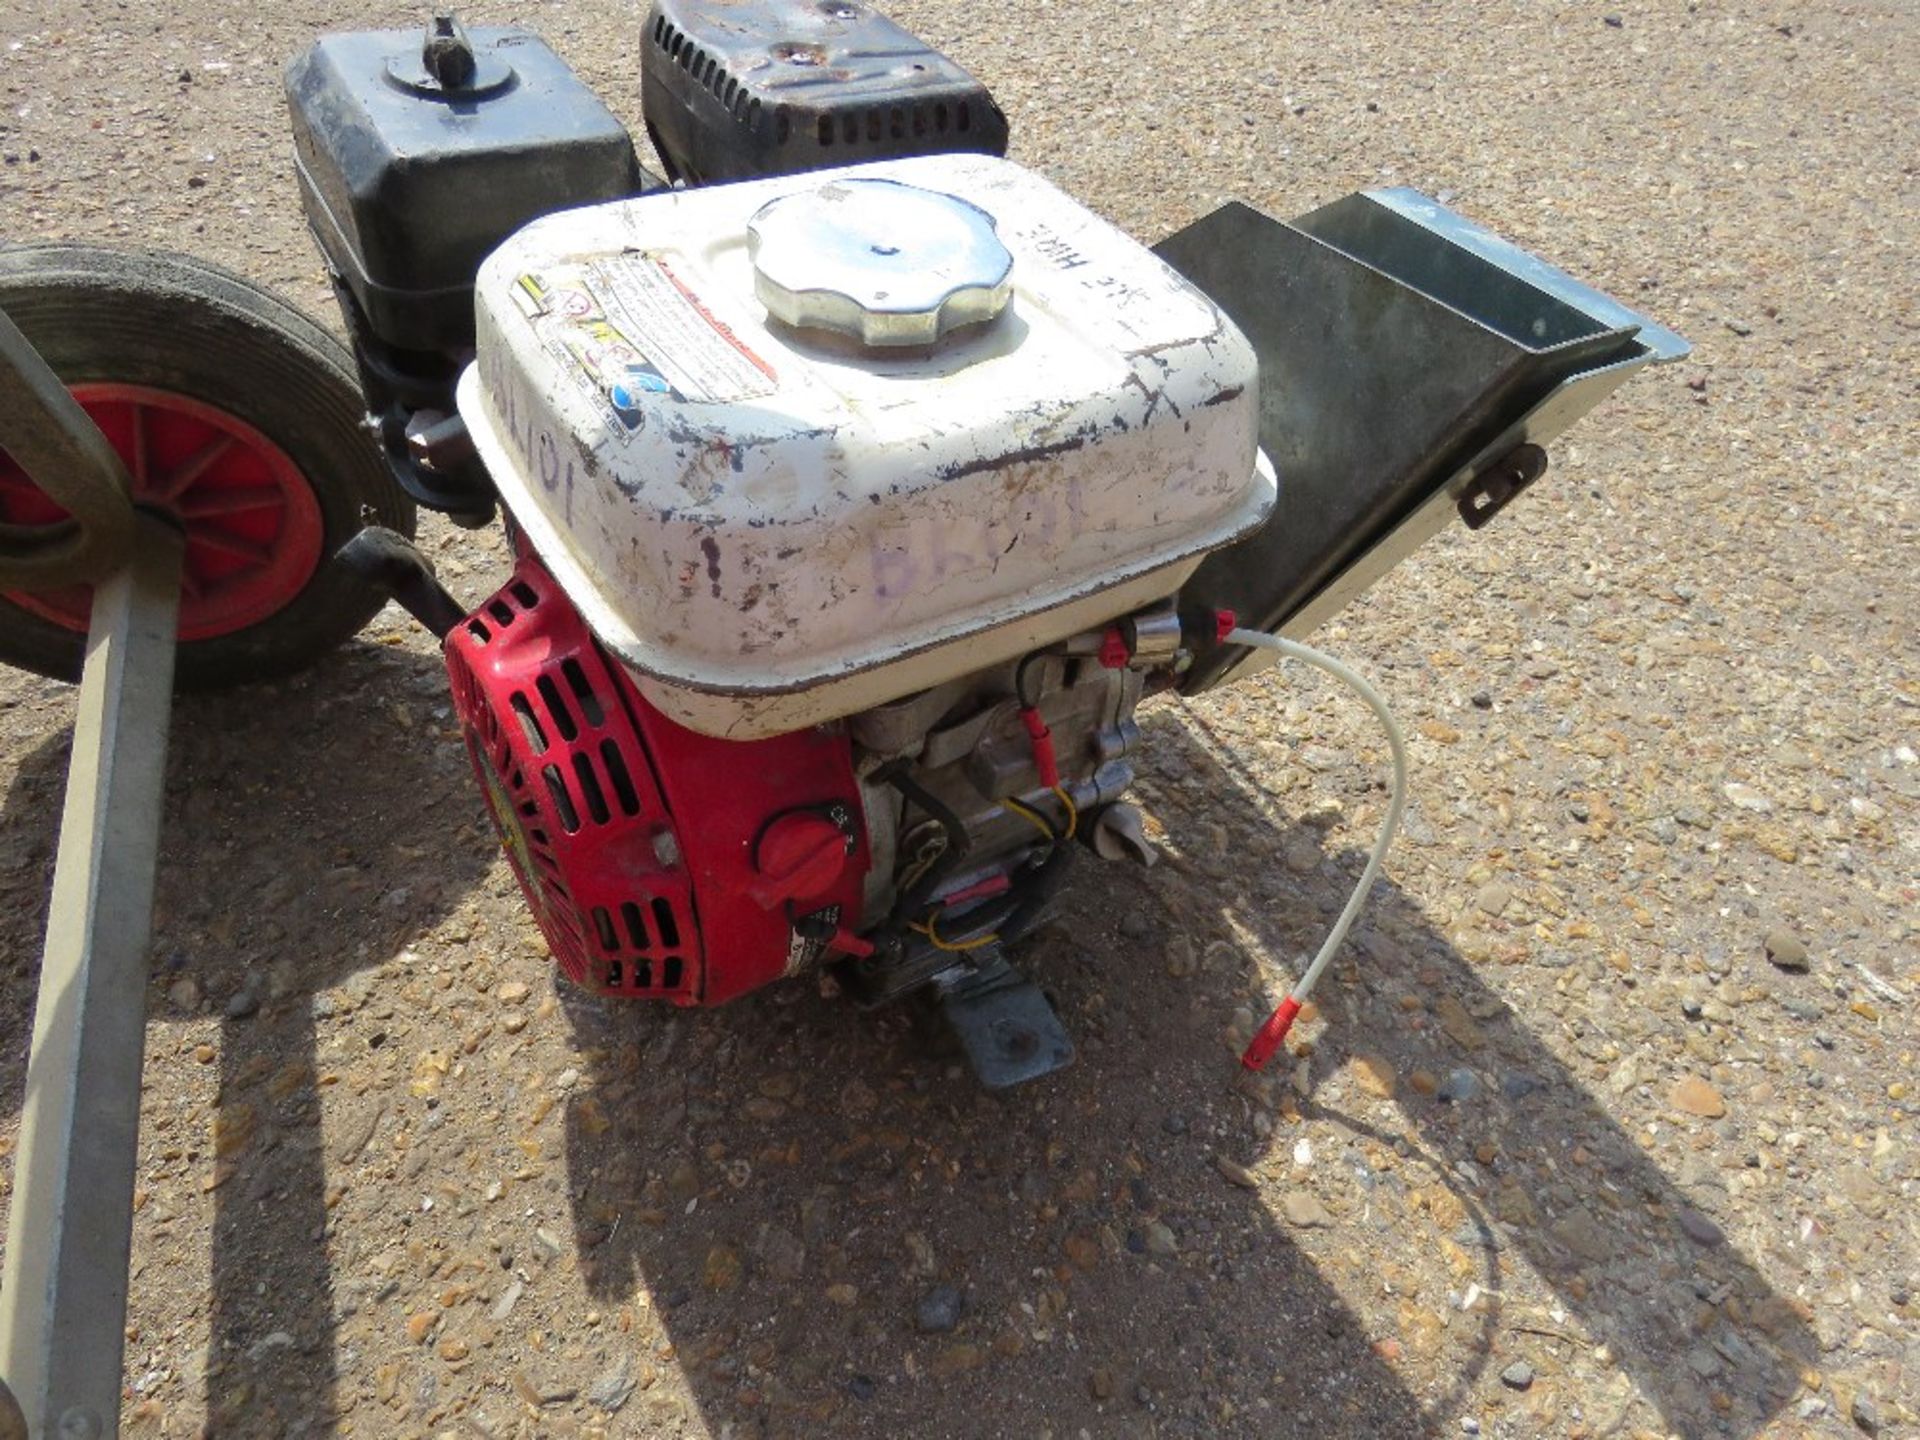 BUMPA PETROL ENGINED TILE HOIST WITH HONDA ENGINE, 32FT OVERALL LENGTH APPROX. - Image 3 of 15